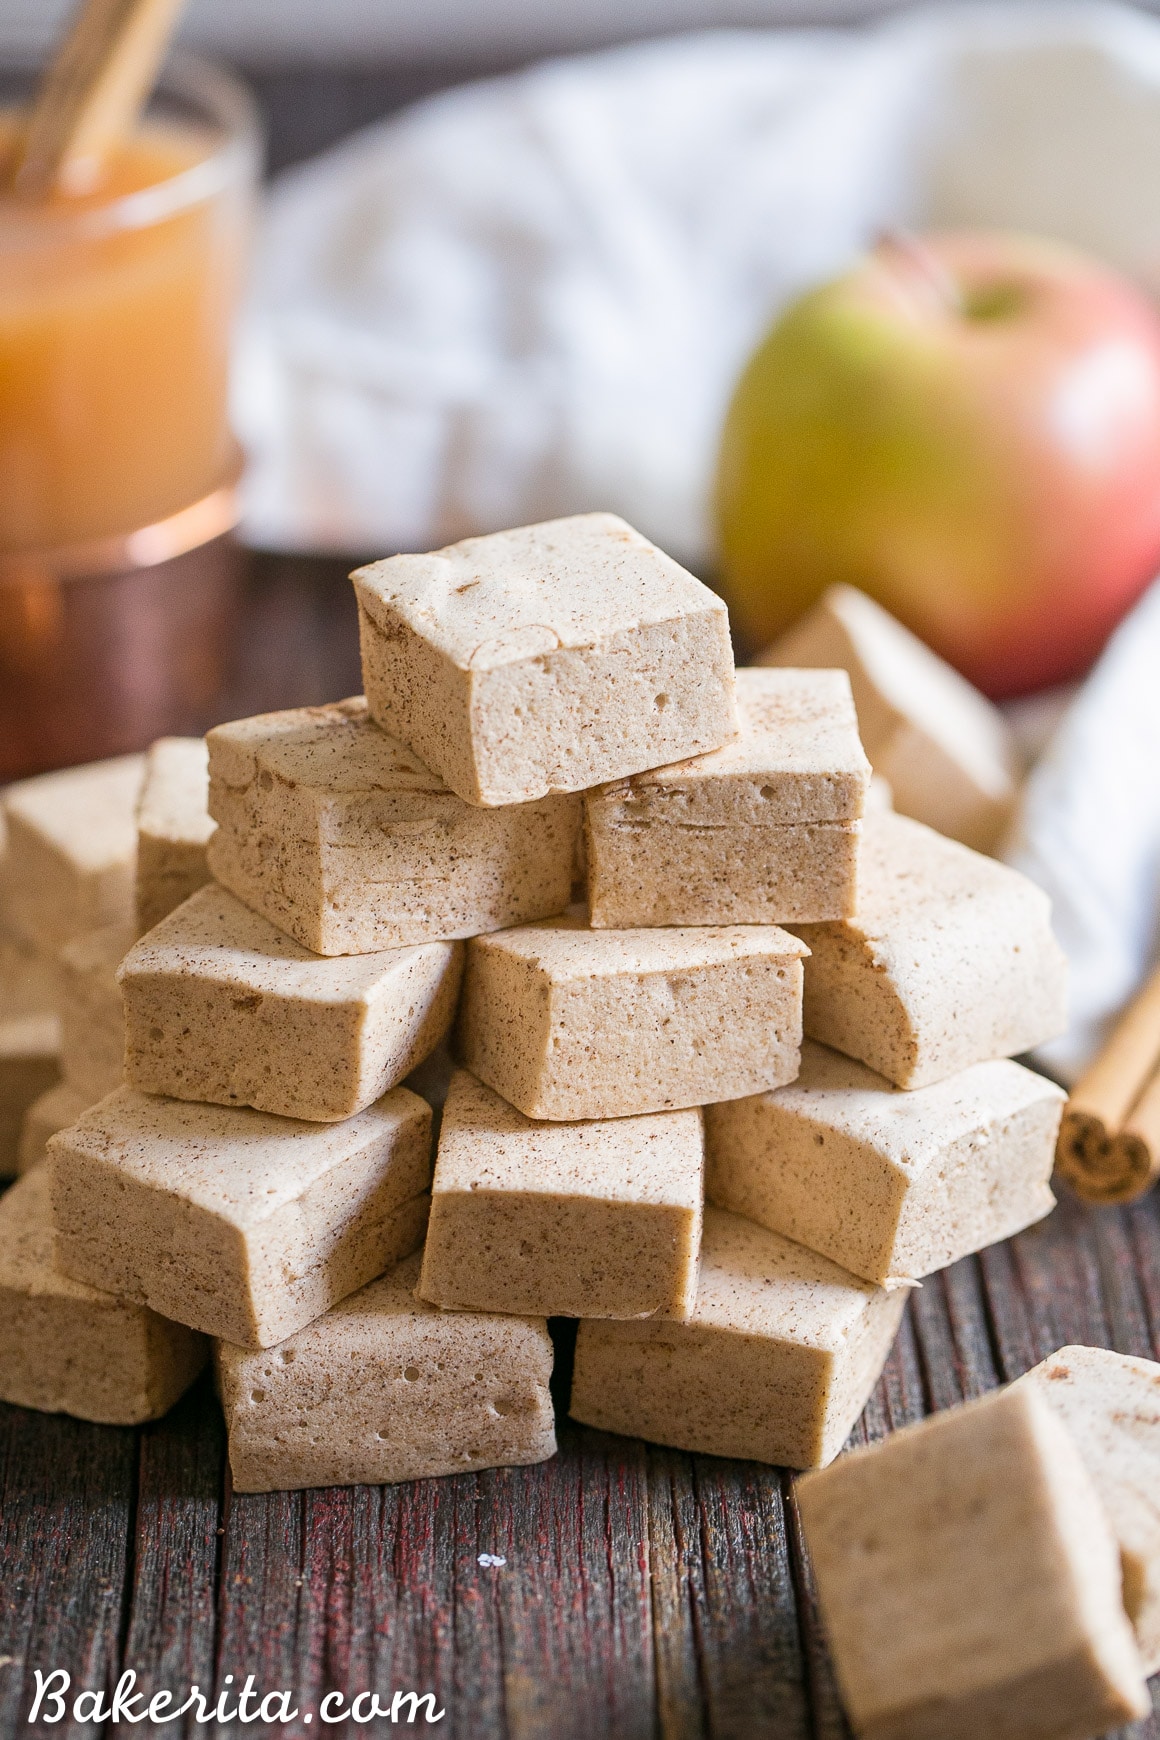 These Paleo Apple Spice Marshmallows are sweetened with maple syrup and flavored with apple juice + loads of warm spices! Homemade marshmallows are easier than you'd think, and you'll love these on their own or as the perfect apple cider addition.